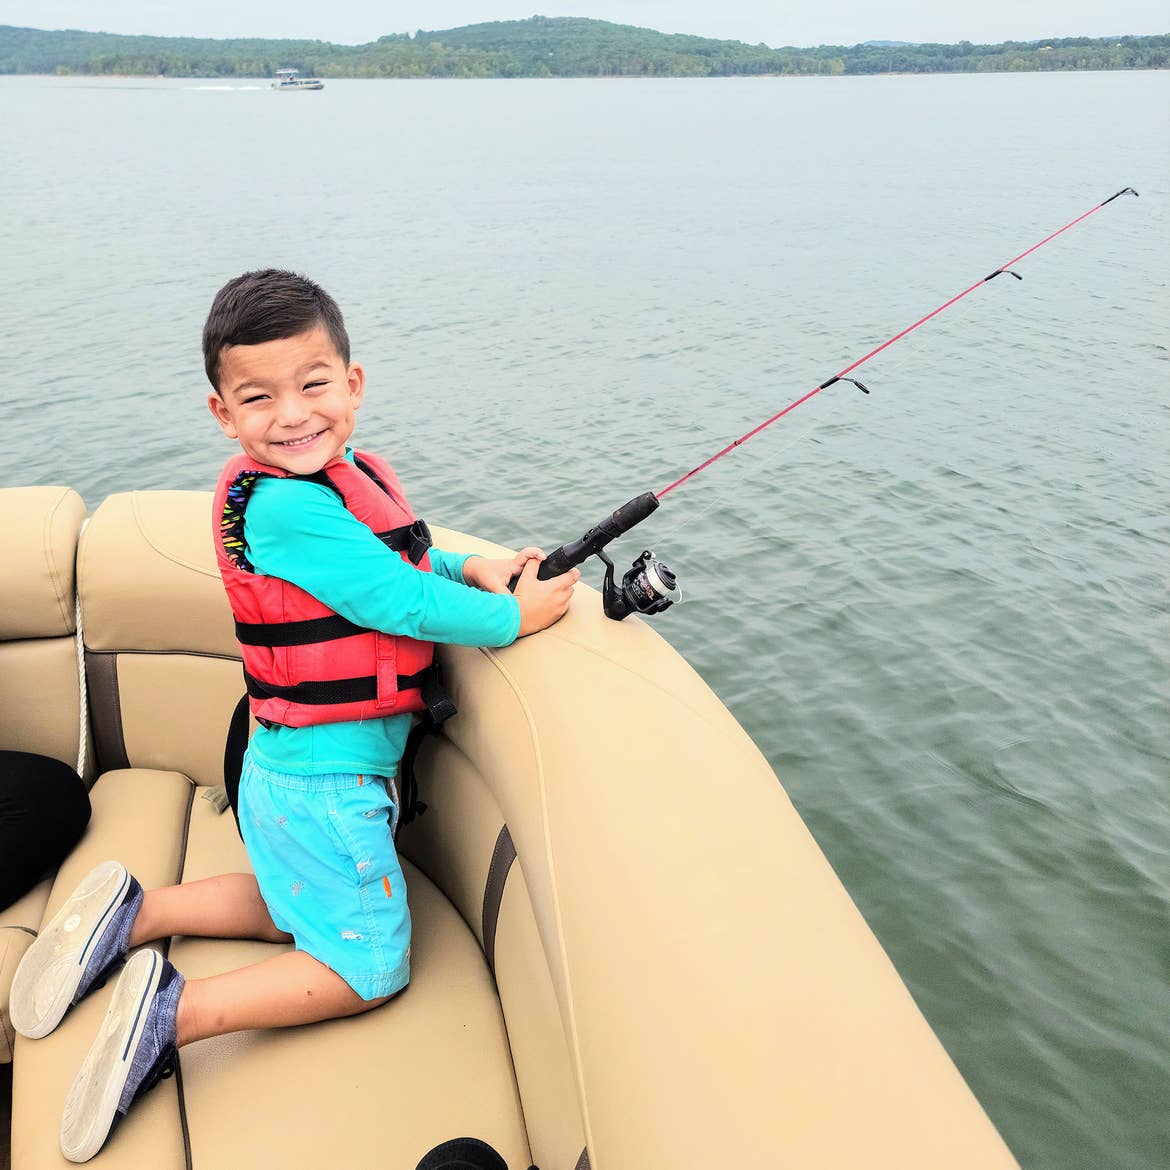 Angelica's son goes fishing off the side of a tritoon wearing a life jacket and aqua swimwear.